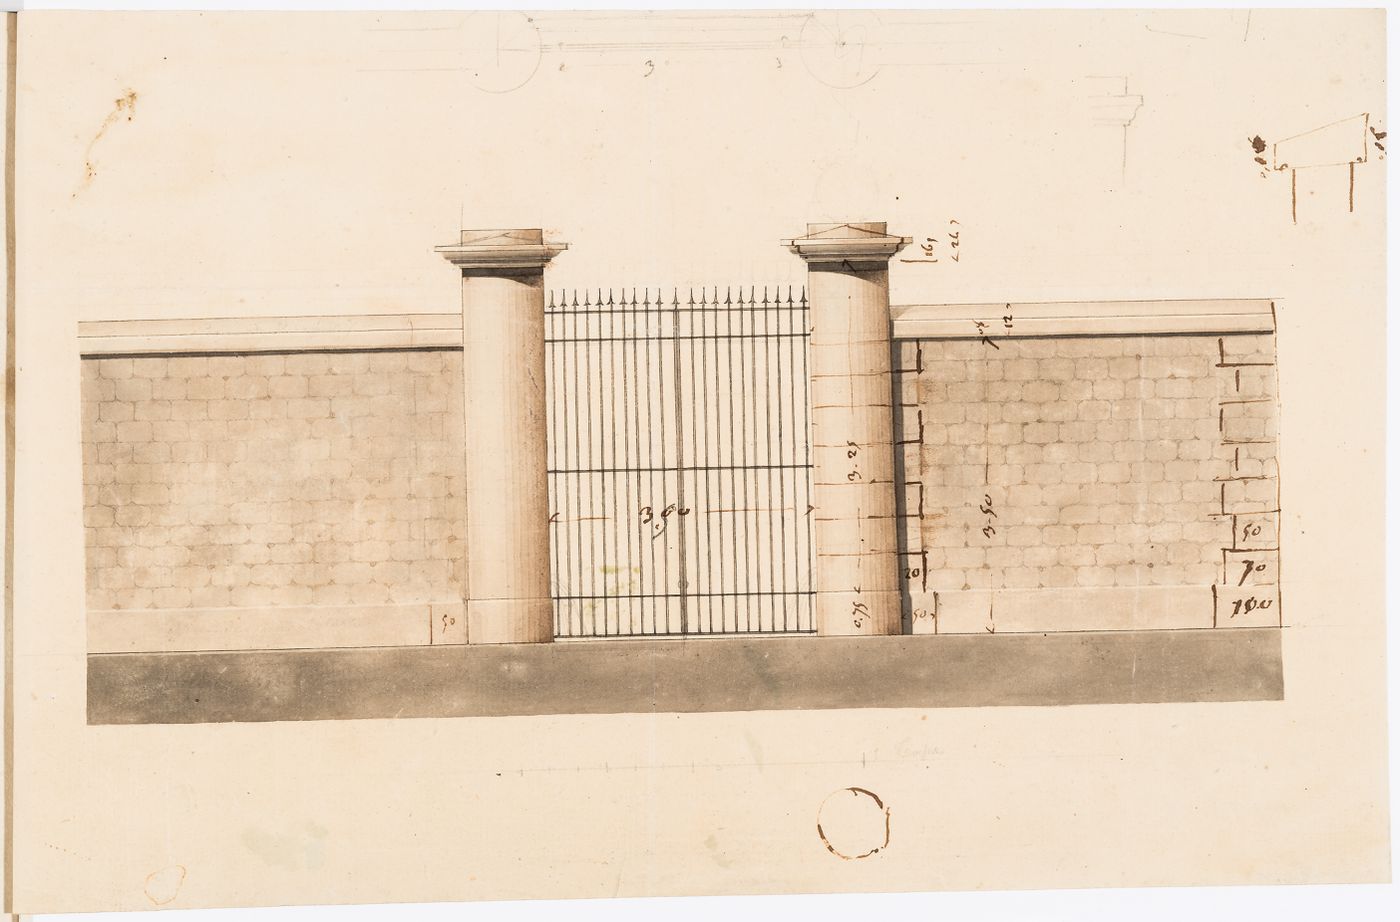 Elevation for a wall and gate, probably for Domaine de La Vallée